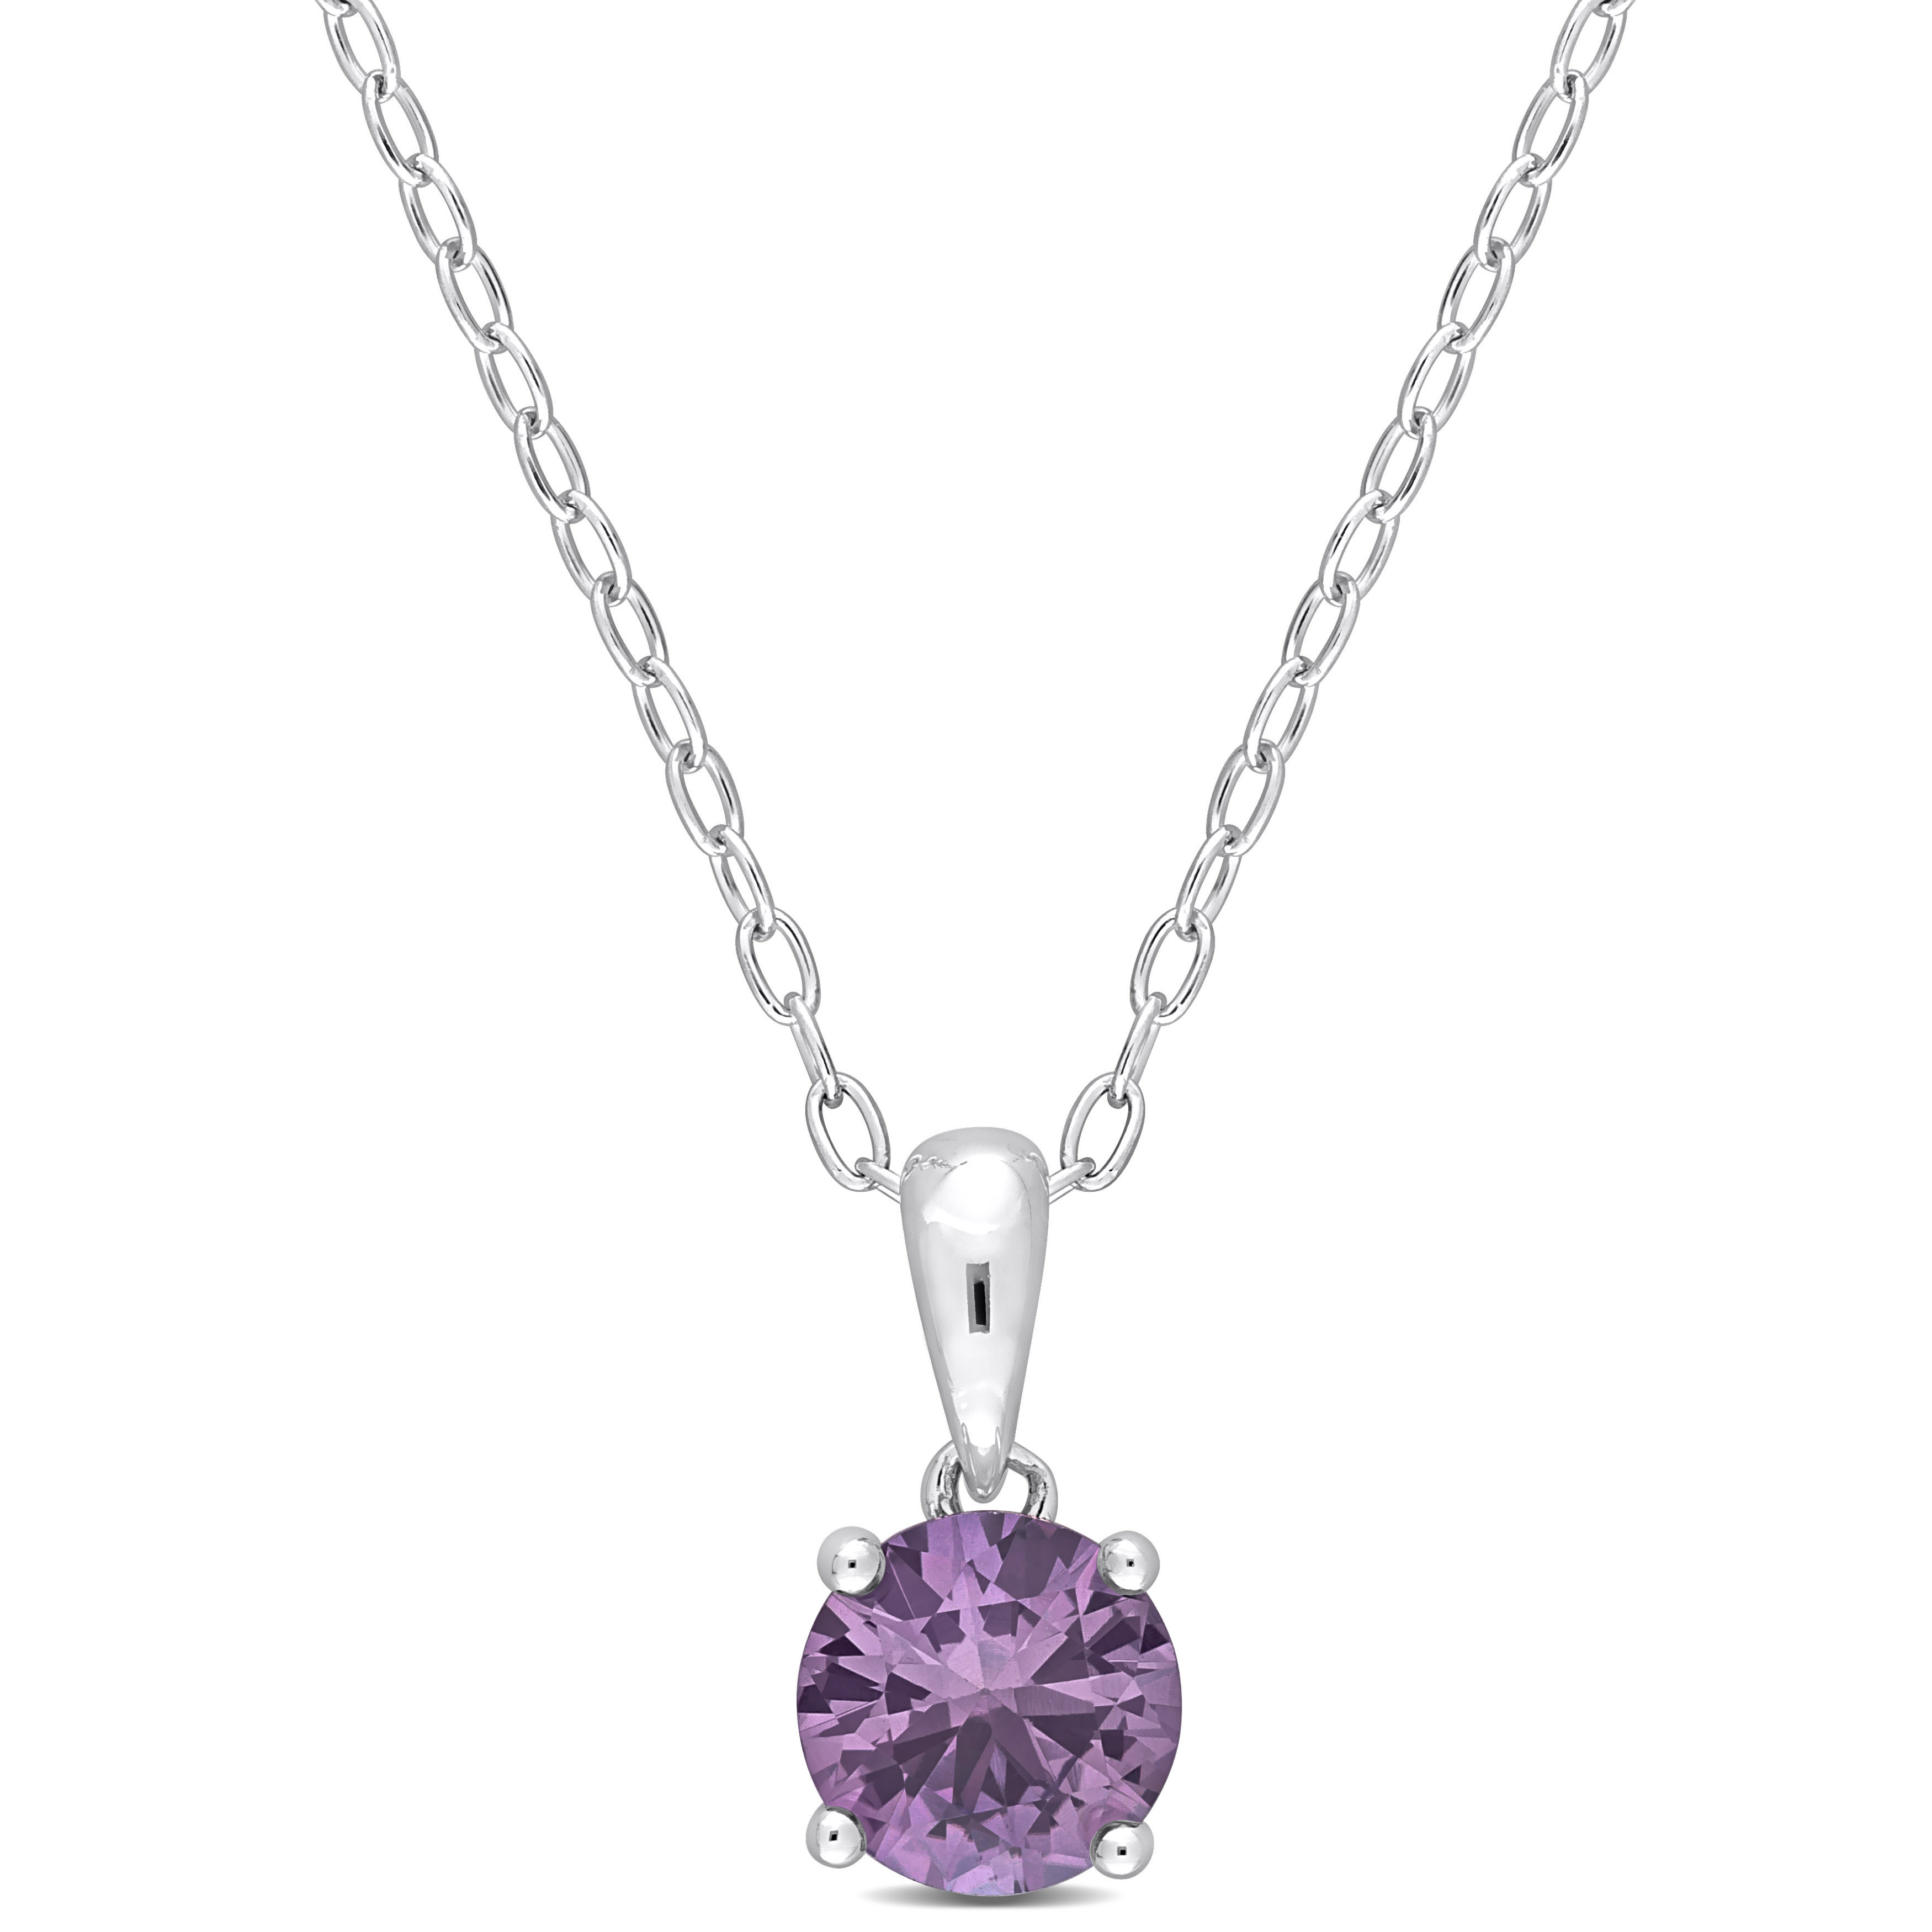 1 CT TGW Simulated Alexandrite Solitaire Heart Design Pendant with Chain in Sterling Silver - 18 in.